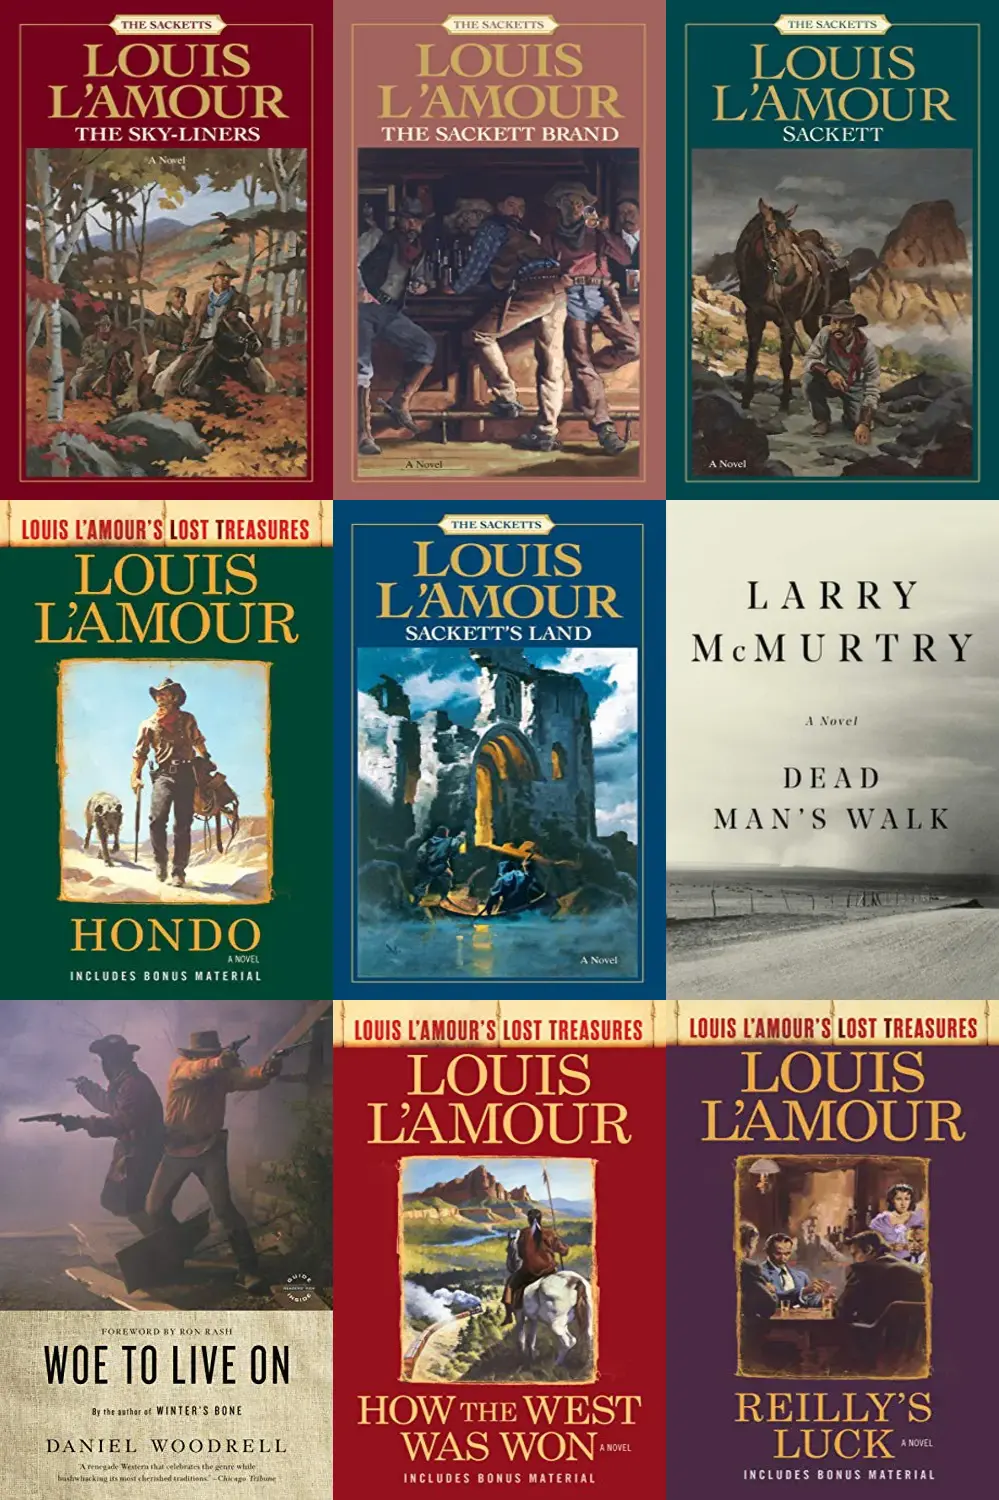 If I liked The Daybreakers (The Sacketts) by Louis L'Amour, what should I  read next?